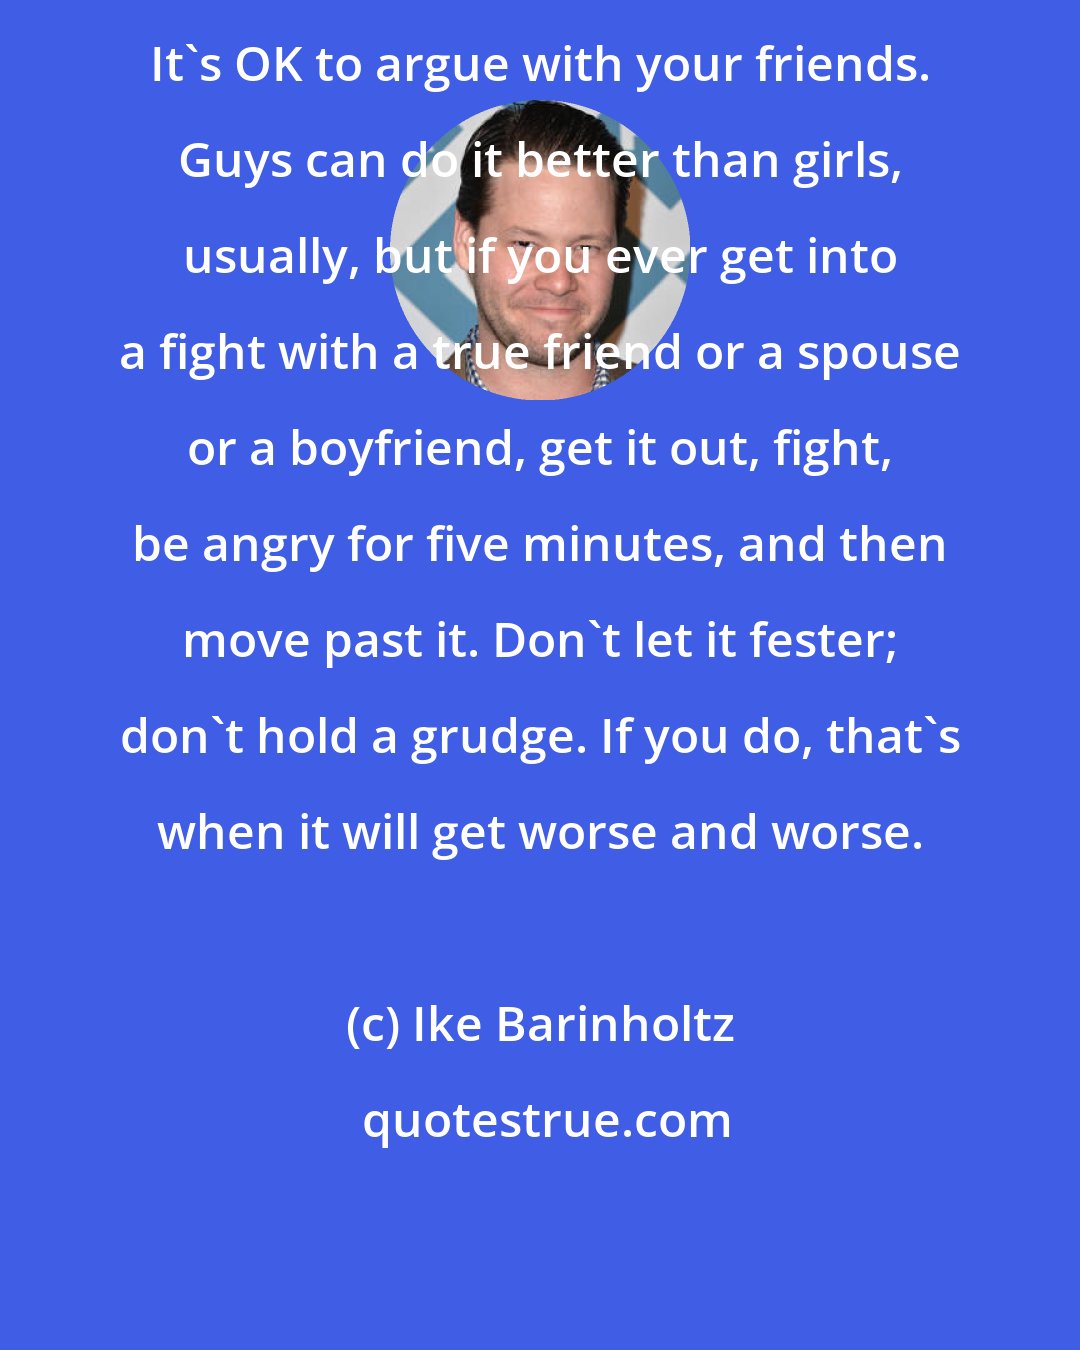 Ike Barinholtz: It's OK to argue with your friends. Guys can do it better than girls, usually, but if you ever get into a fight with a true friend or a spouse or a boyfriend, get it out, fight, be angry for five minutes, and then move past it. Don't let it fester; don't hold a grudge. If you do, that's when it will get worse and worse.